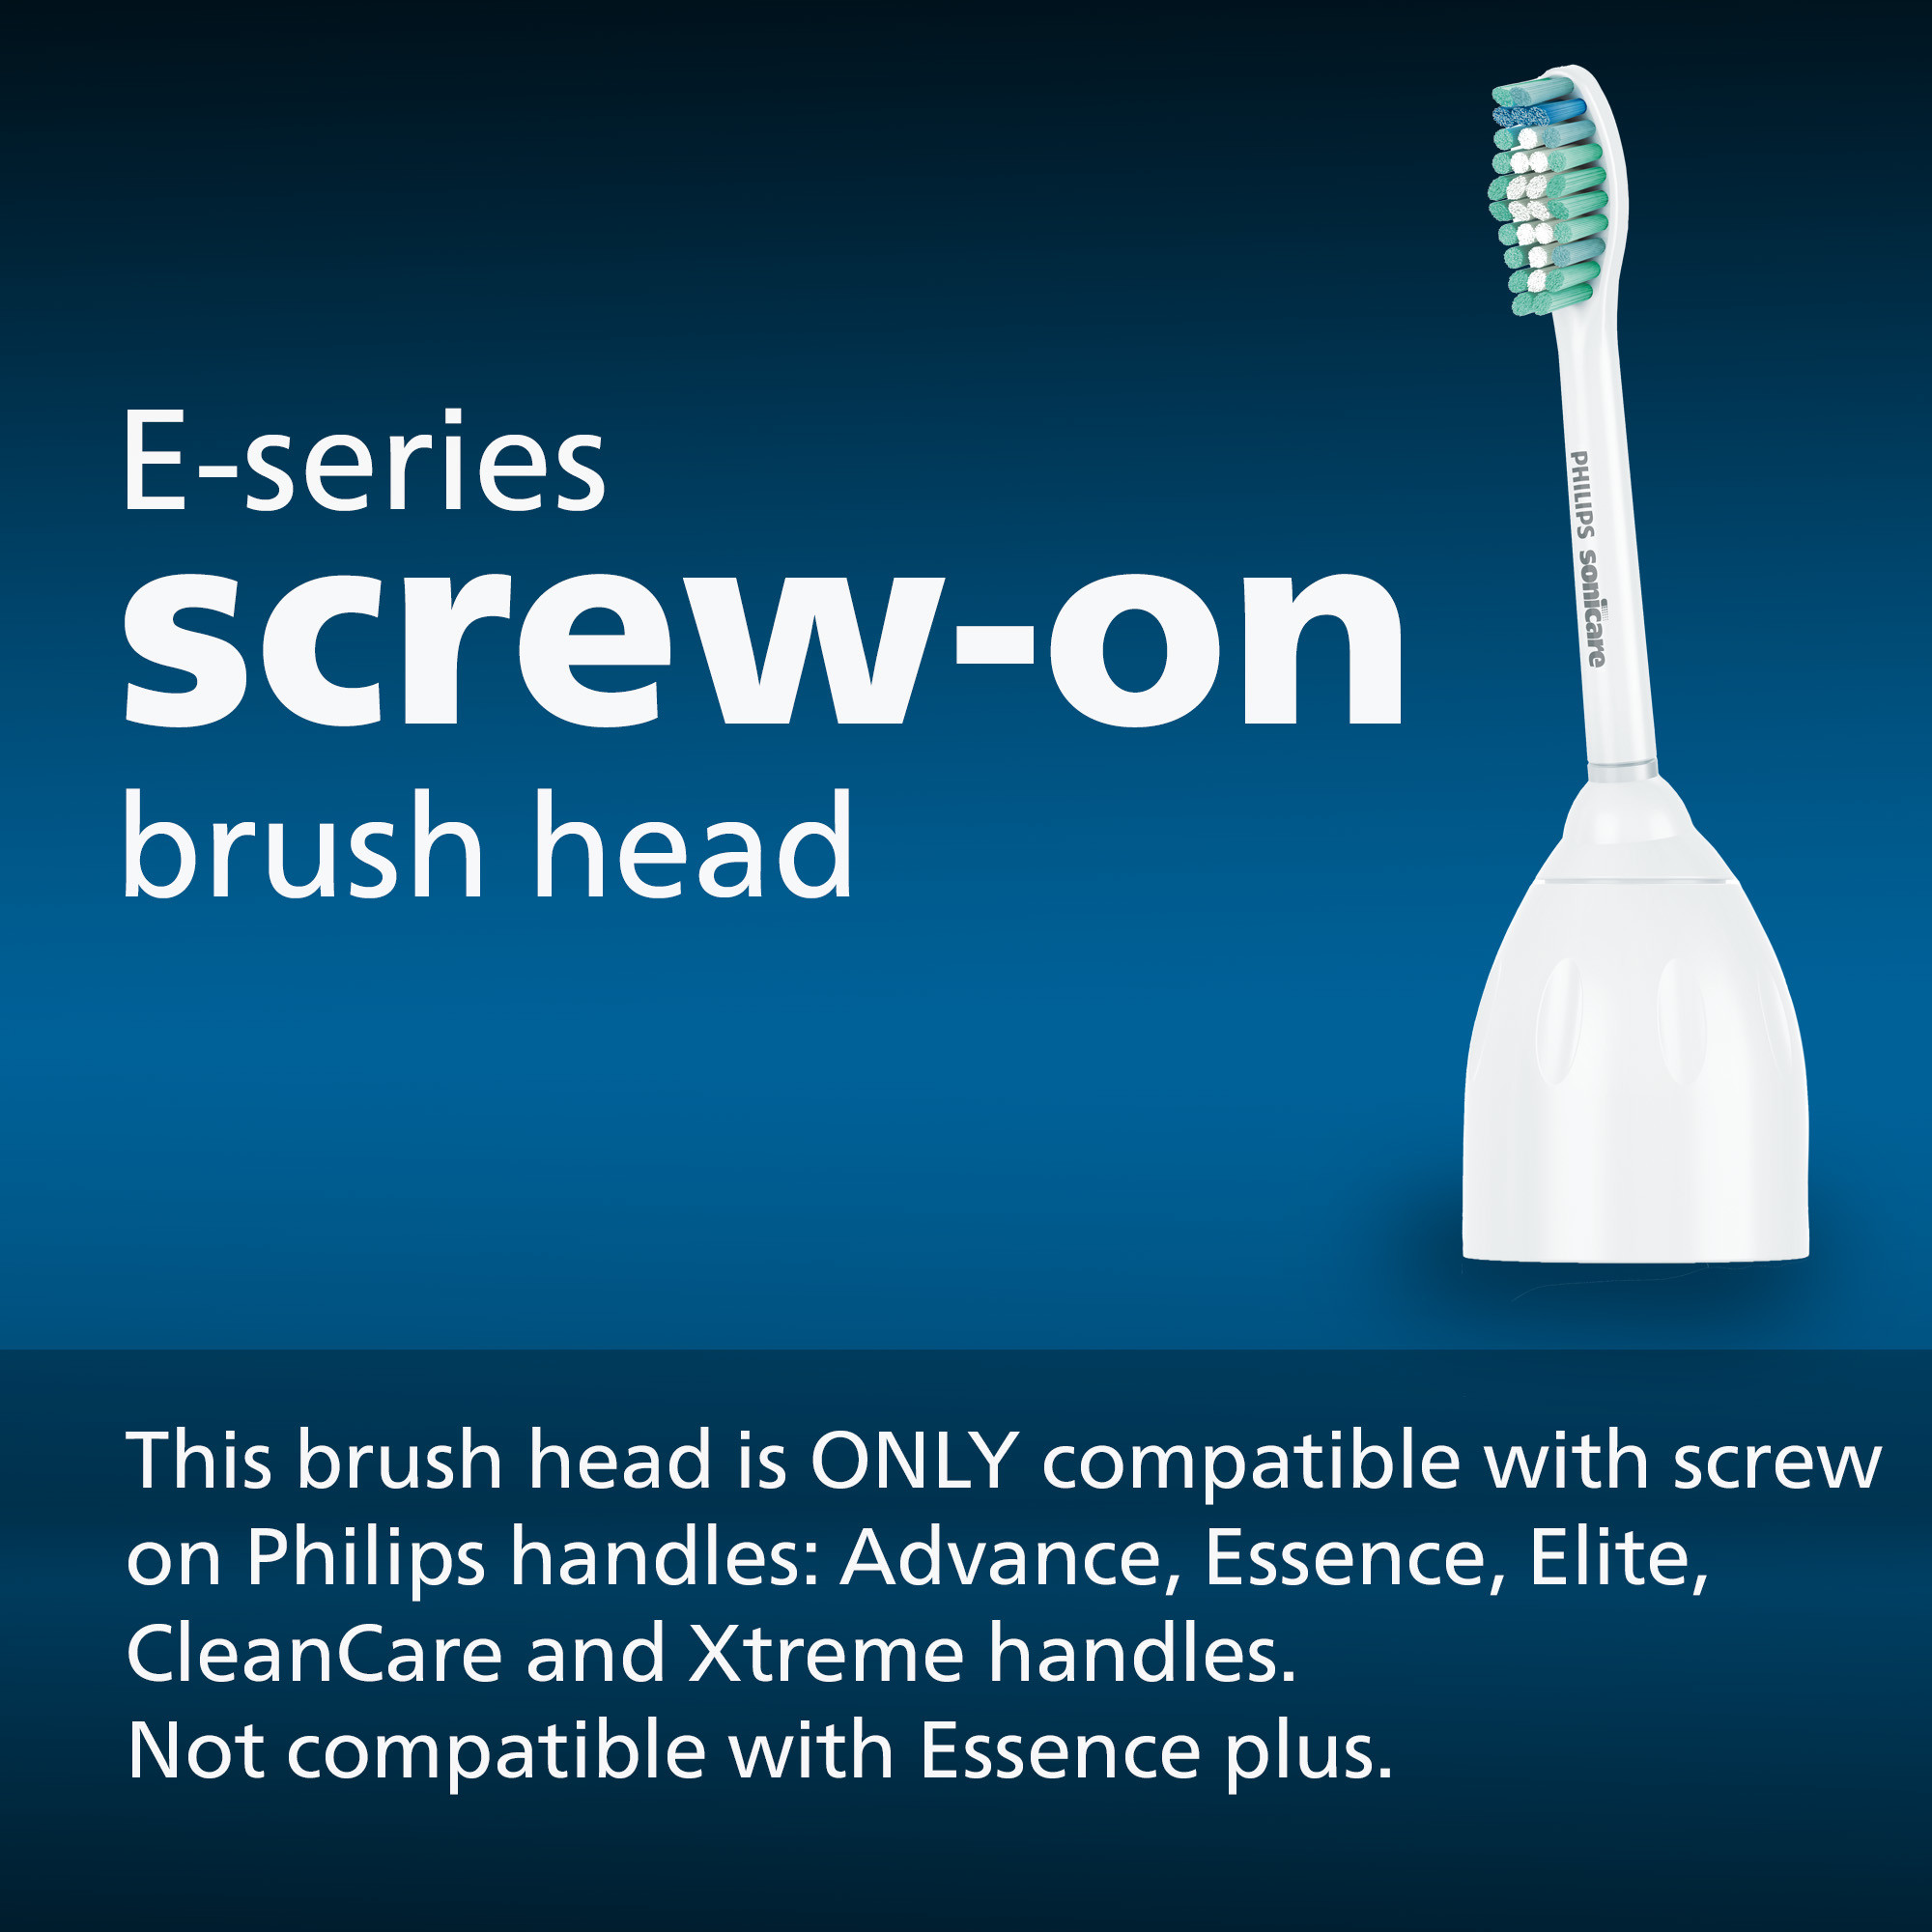 Philips Sonicare E-Series Replacement Toothbrush Heads, HX7023/64, 3-pk - image 3 of 14